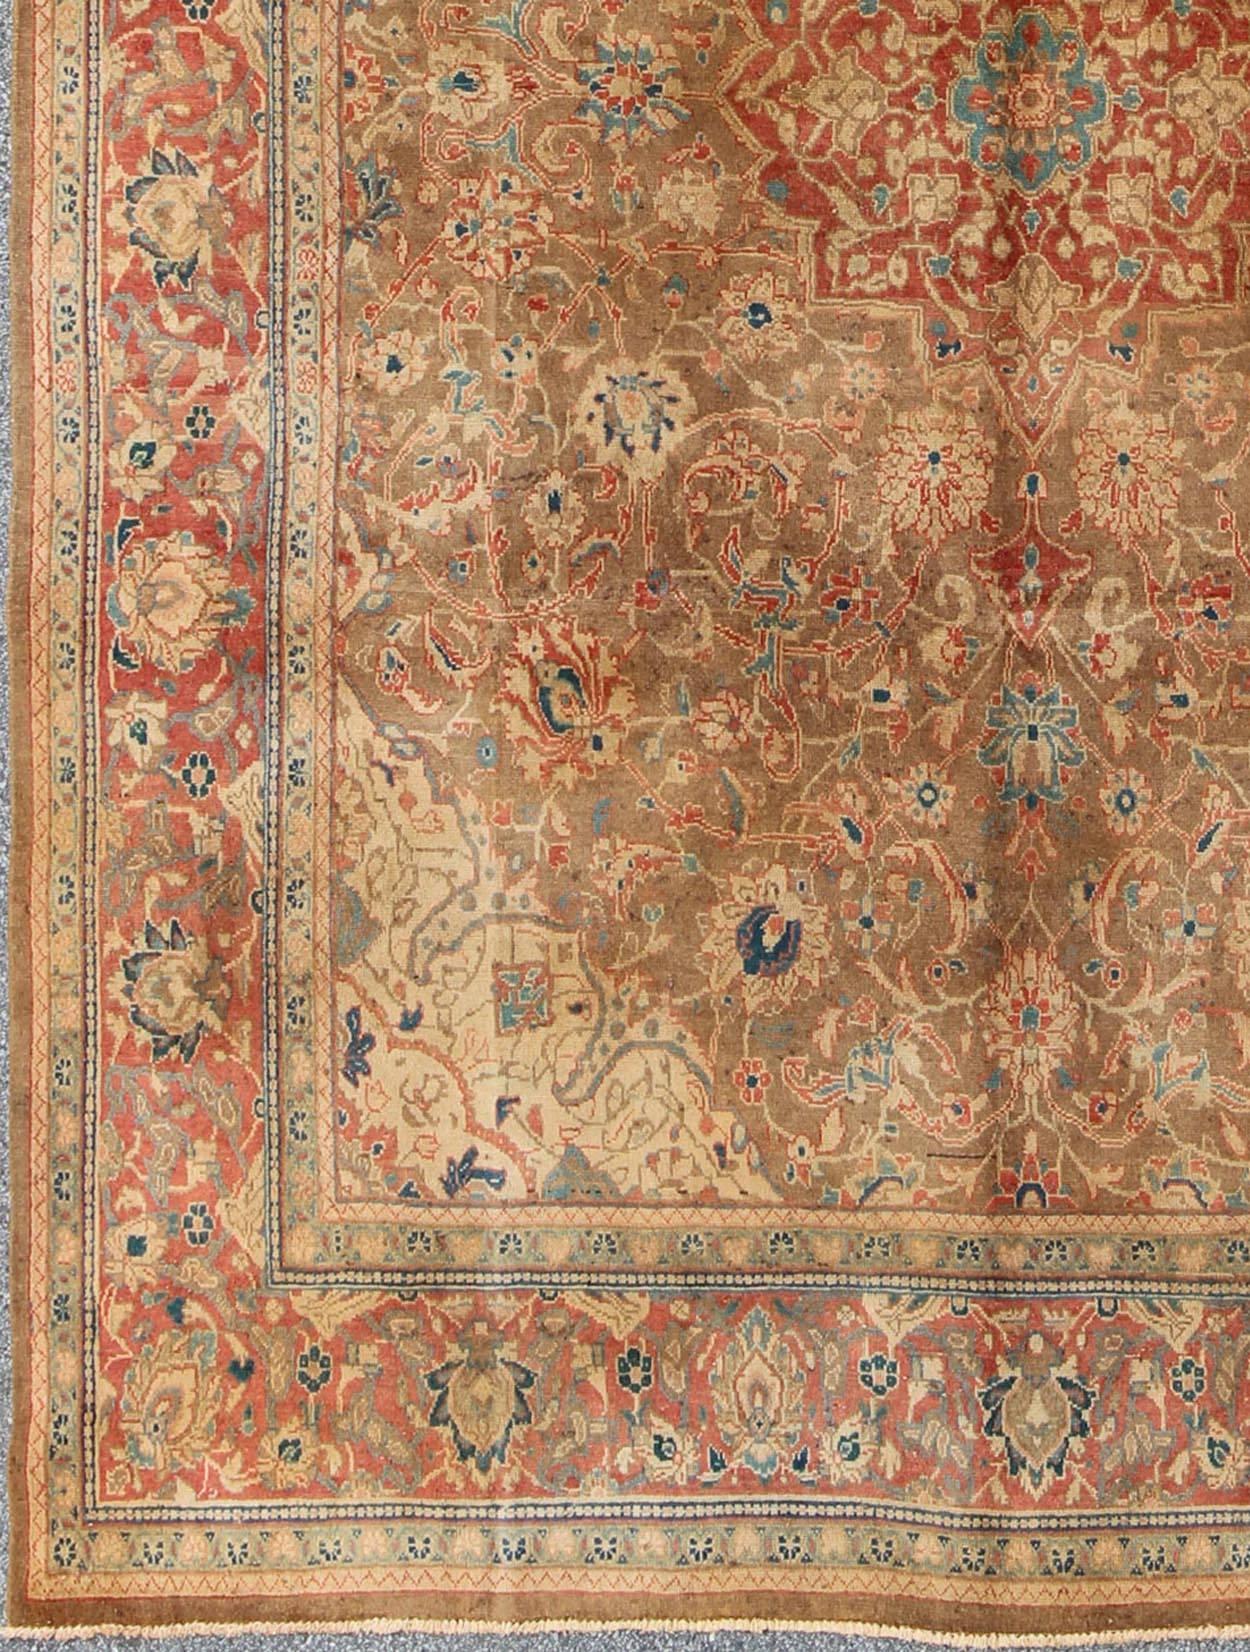 Antique Mahal Rug with Floral Pattern in Camel, Coral, Turquoise , Rust Red 
Antique Persian Mahal Rug with Floral Pattern, Rug 904-17, Country of Origin/Iran, Type/Persian Mahal. 
This antique Mahal relies heavily on exquisite details of  flowers